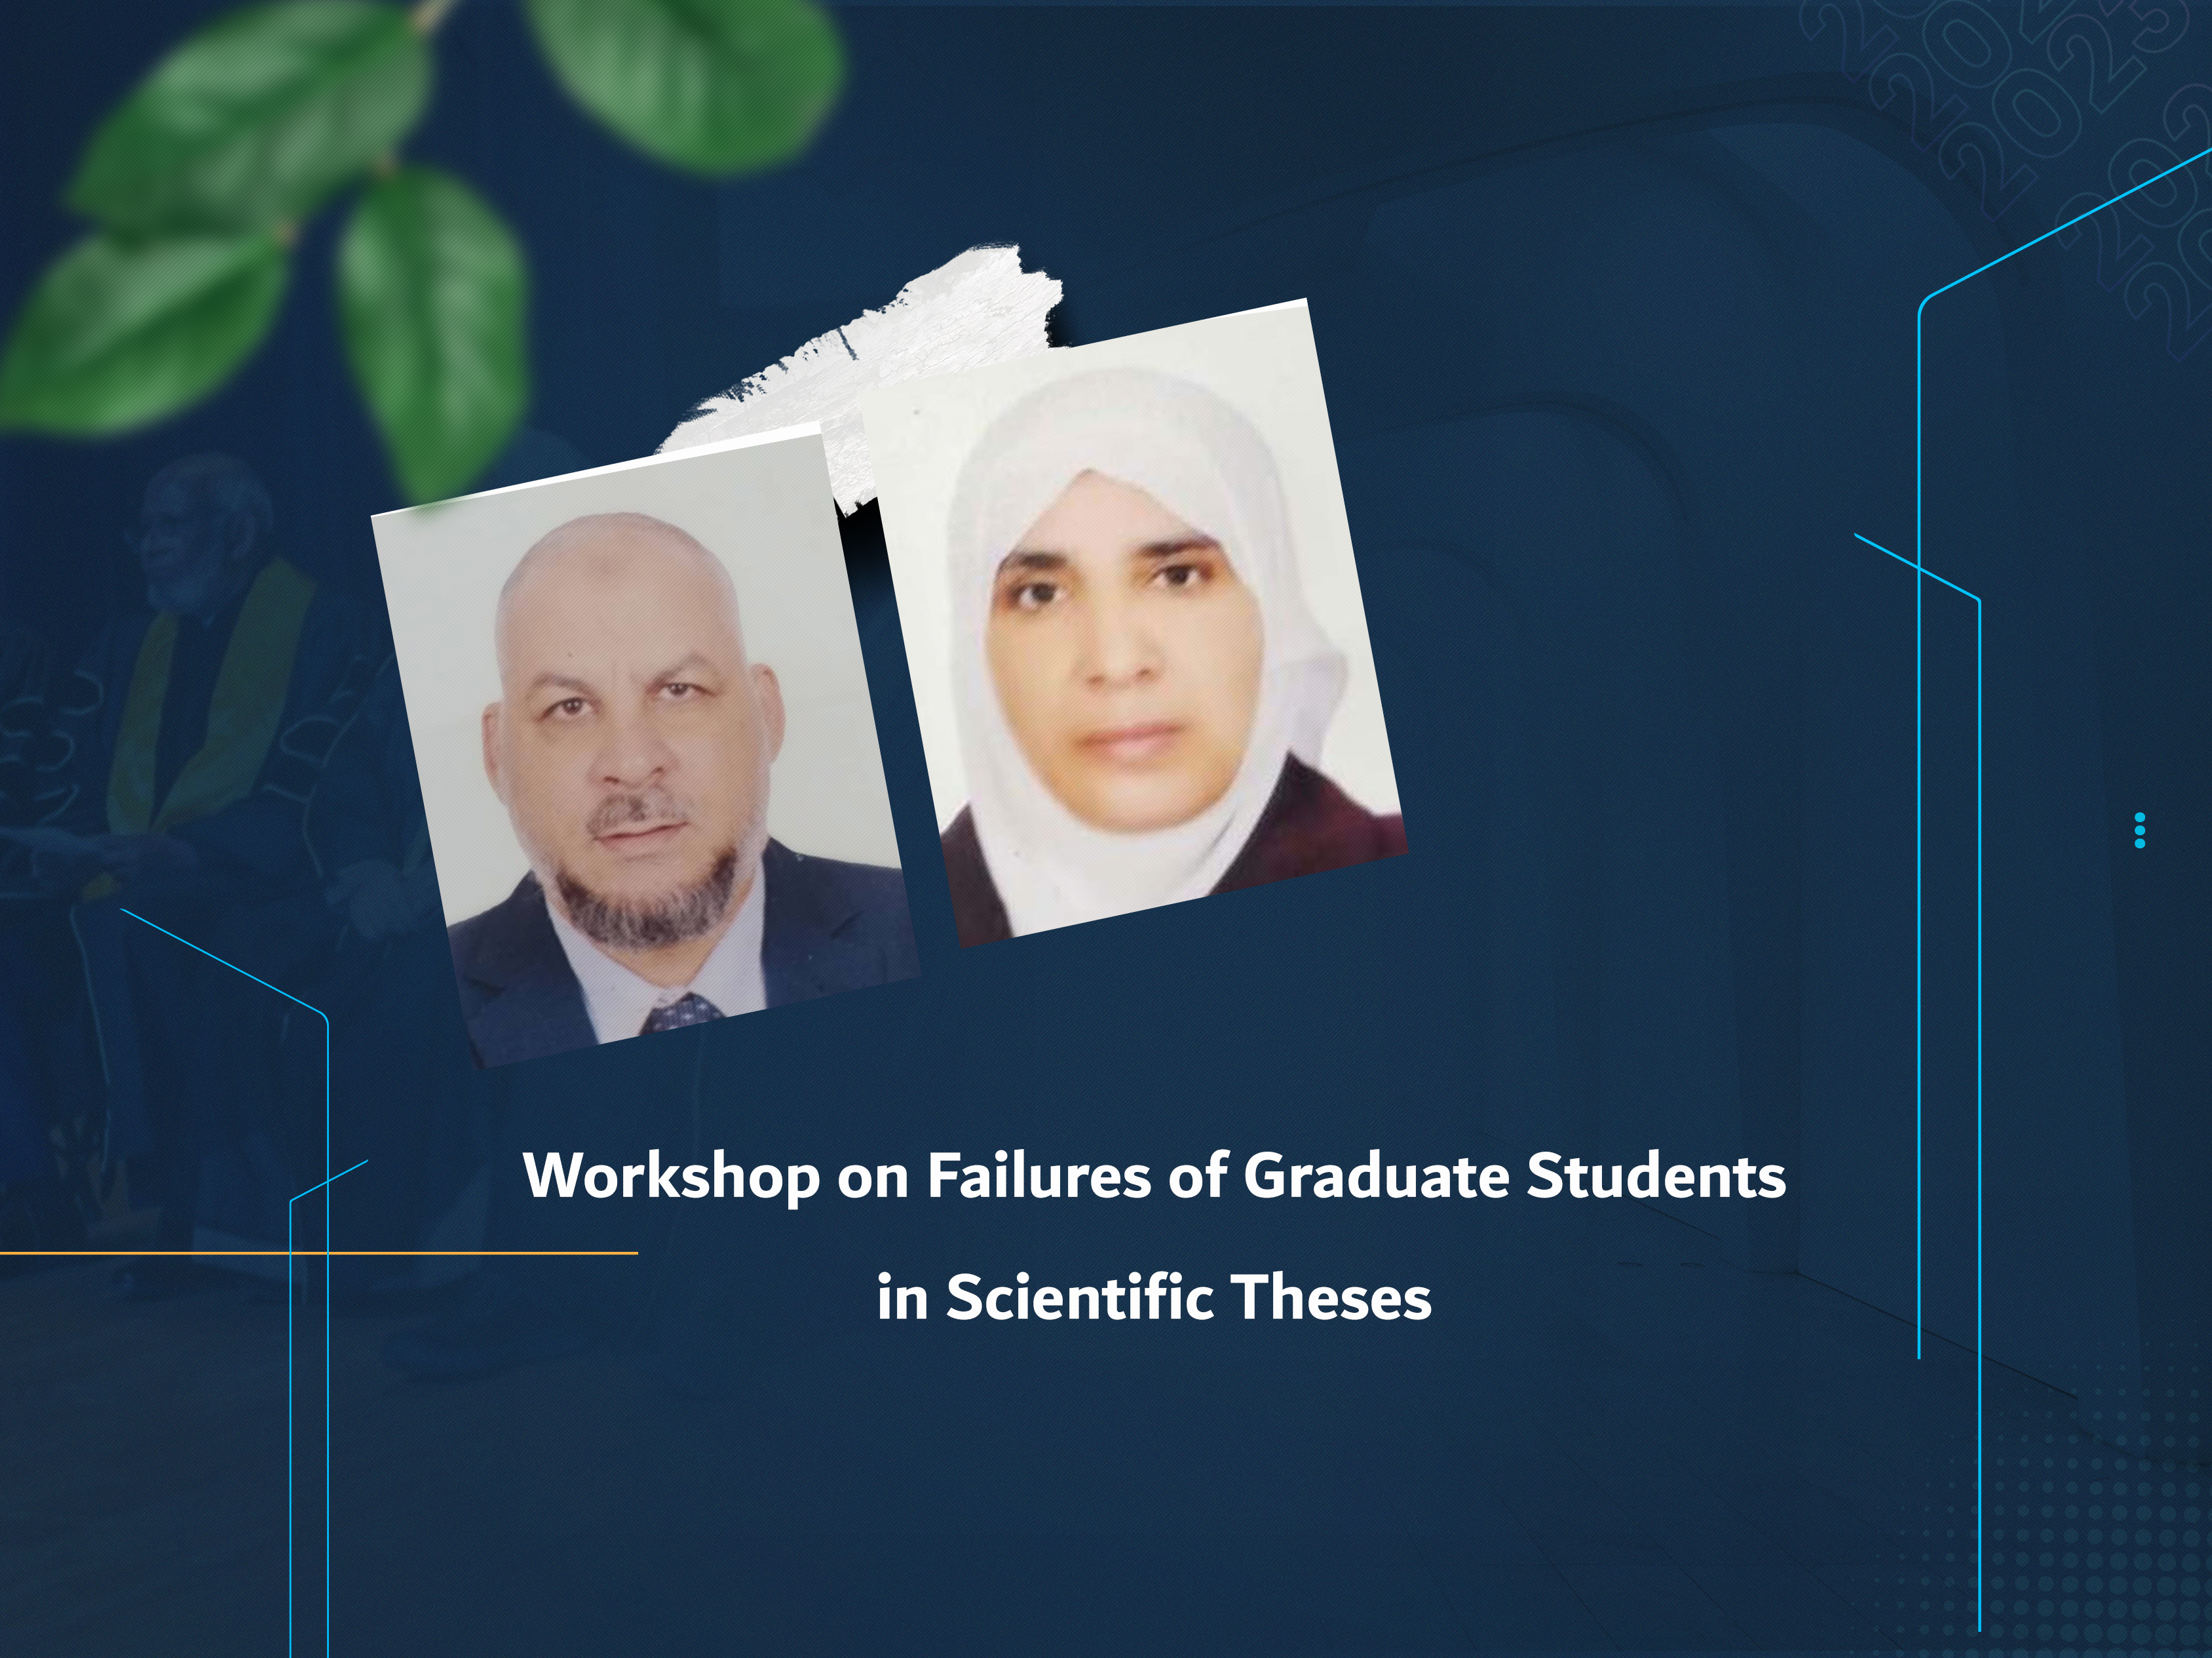 Workshop on Failures of Graduate Students in Scientific Theses